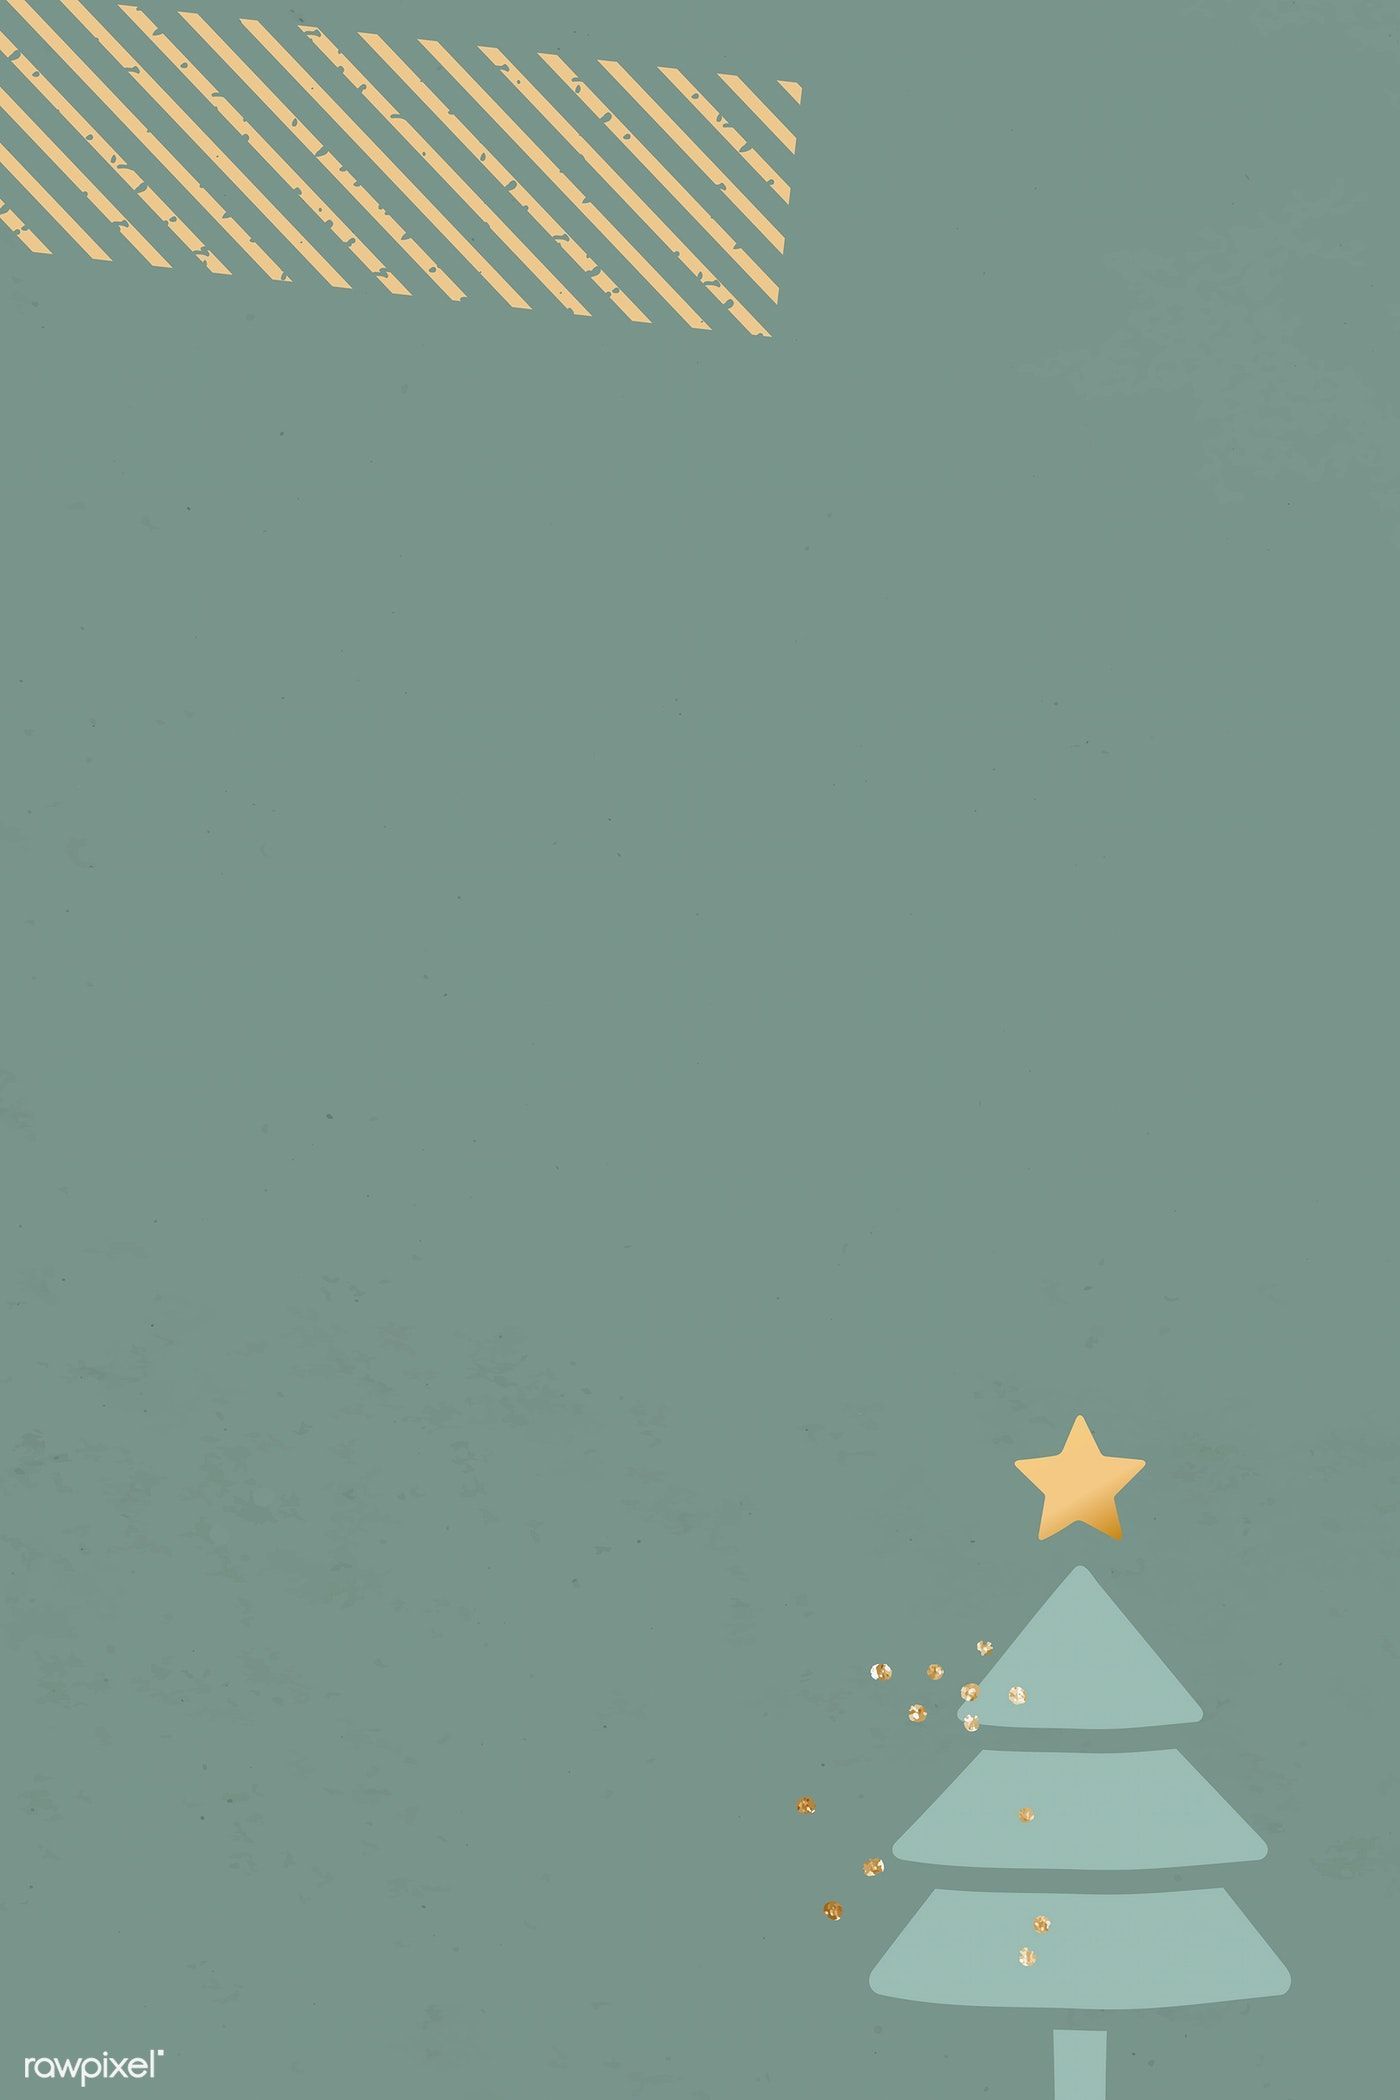 Download premium vector of Christmas patterned on green background vector. Cute christmas wallpaper, Christmas wallpaper background, Free christmas background